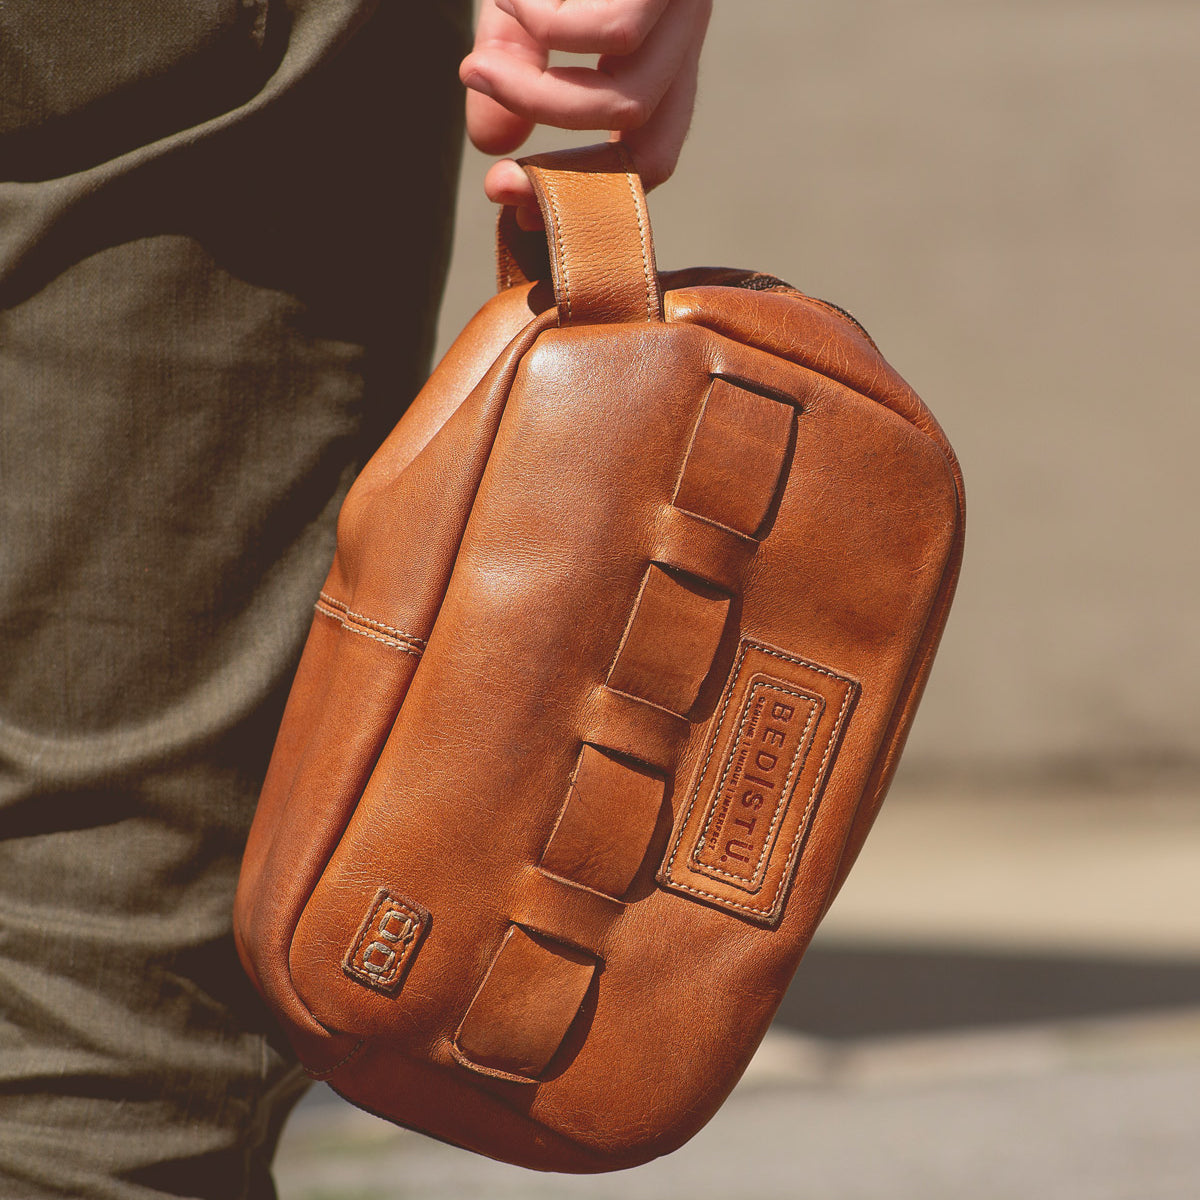 A person carrying a tan leather sling bag featuring a handle and multiple loops, with an embossed Bed Stu logo visible, perfect for travel essentials.